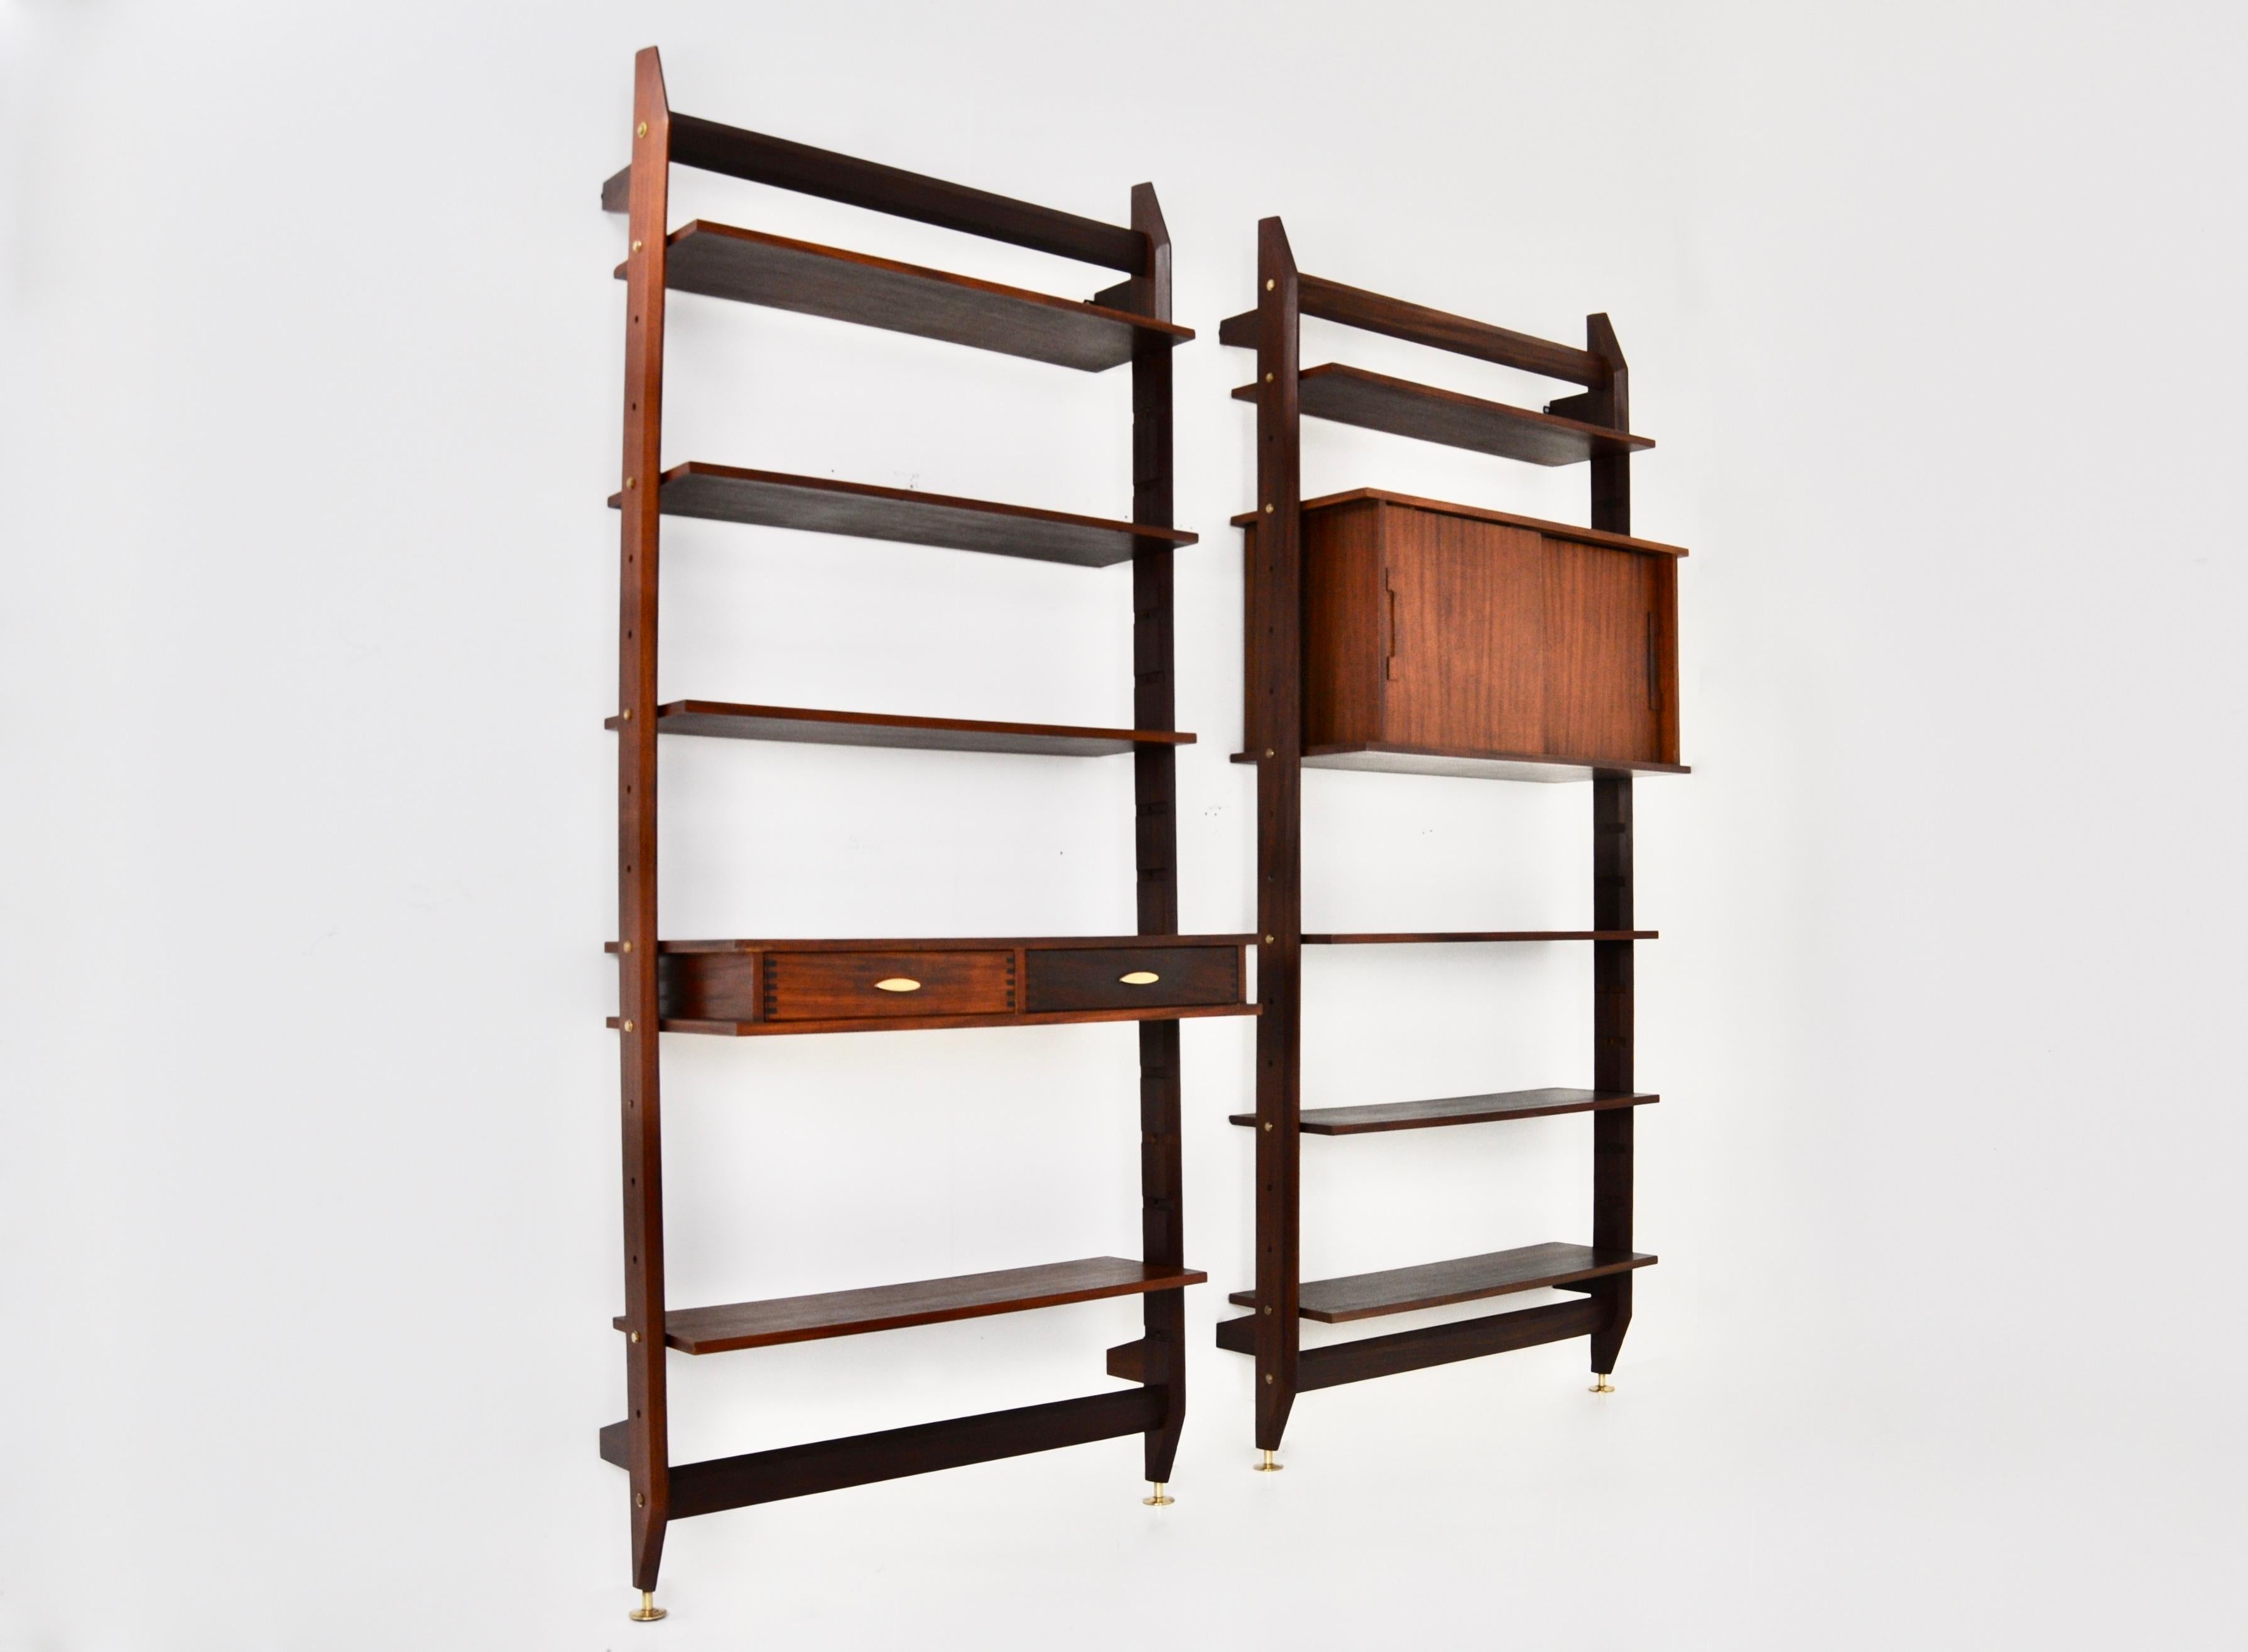 Set of 2 modular wall units in wood and brass consisting of 8 shelves and a double-door box containing 1 shelf and 1 box with 2 drawers. Wear due to time and age.